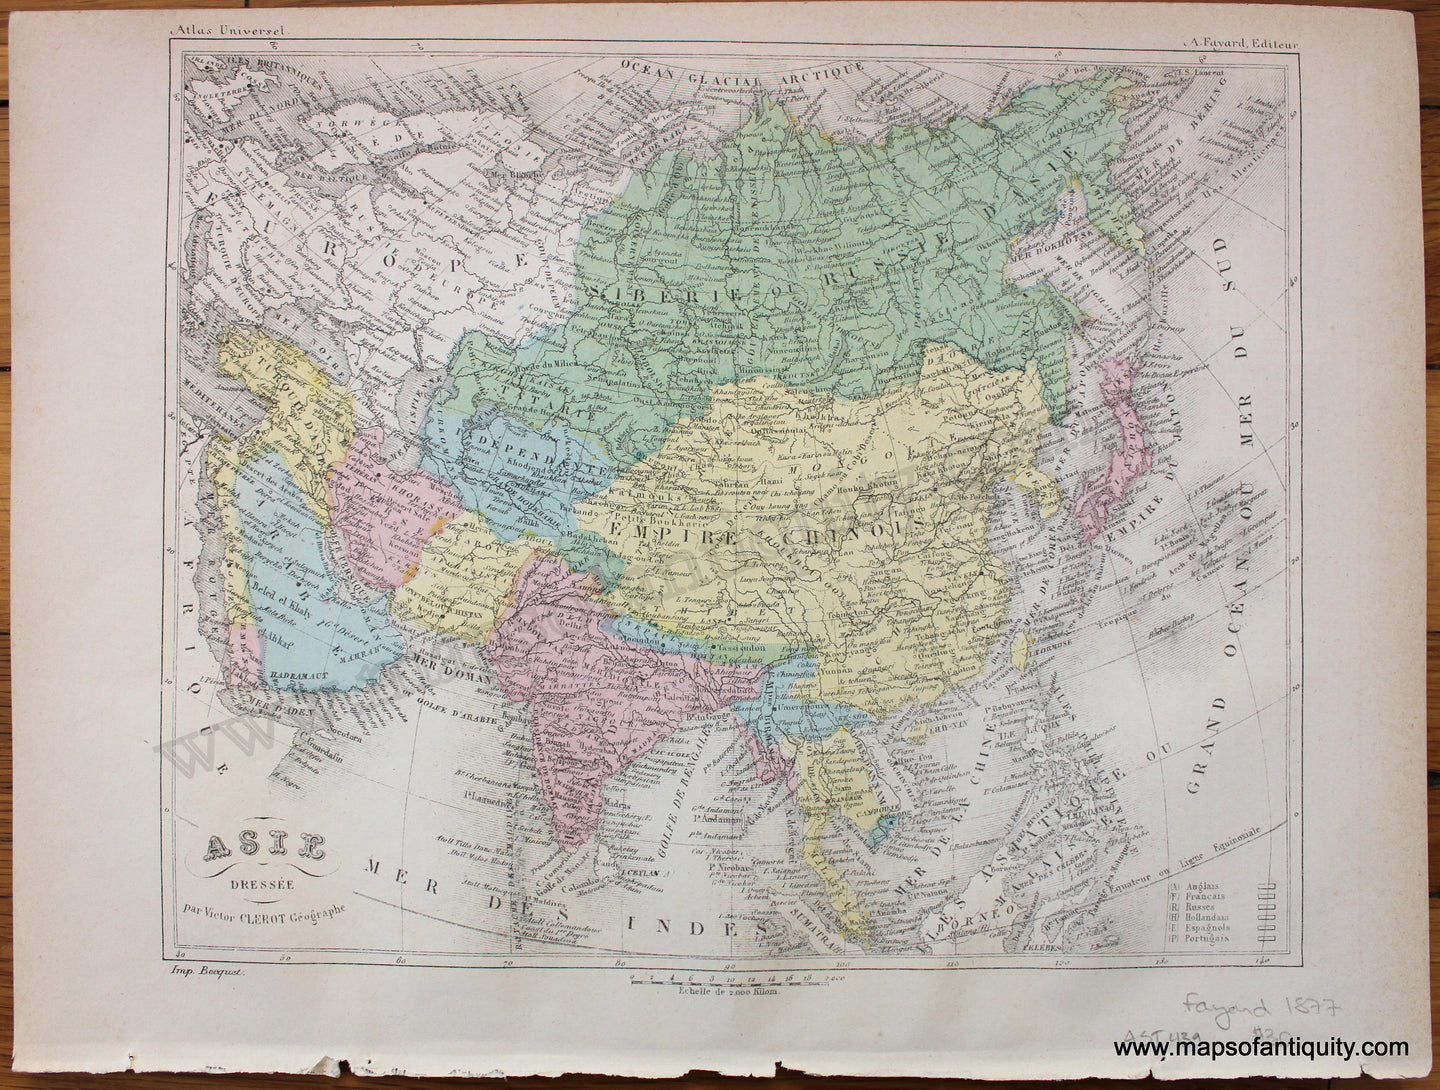 Antique-Printed-Color-Map-Asie-1877-Fayard---1800s-19th-century-Maps-of-Antiquity